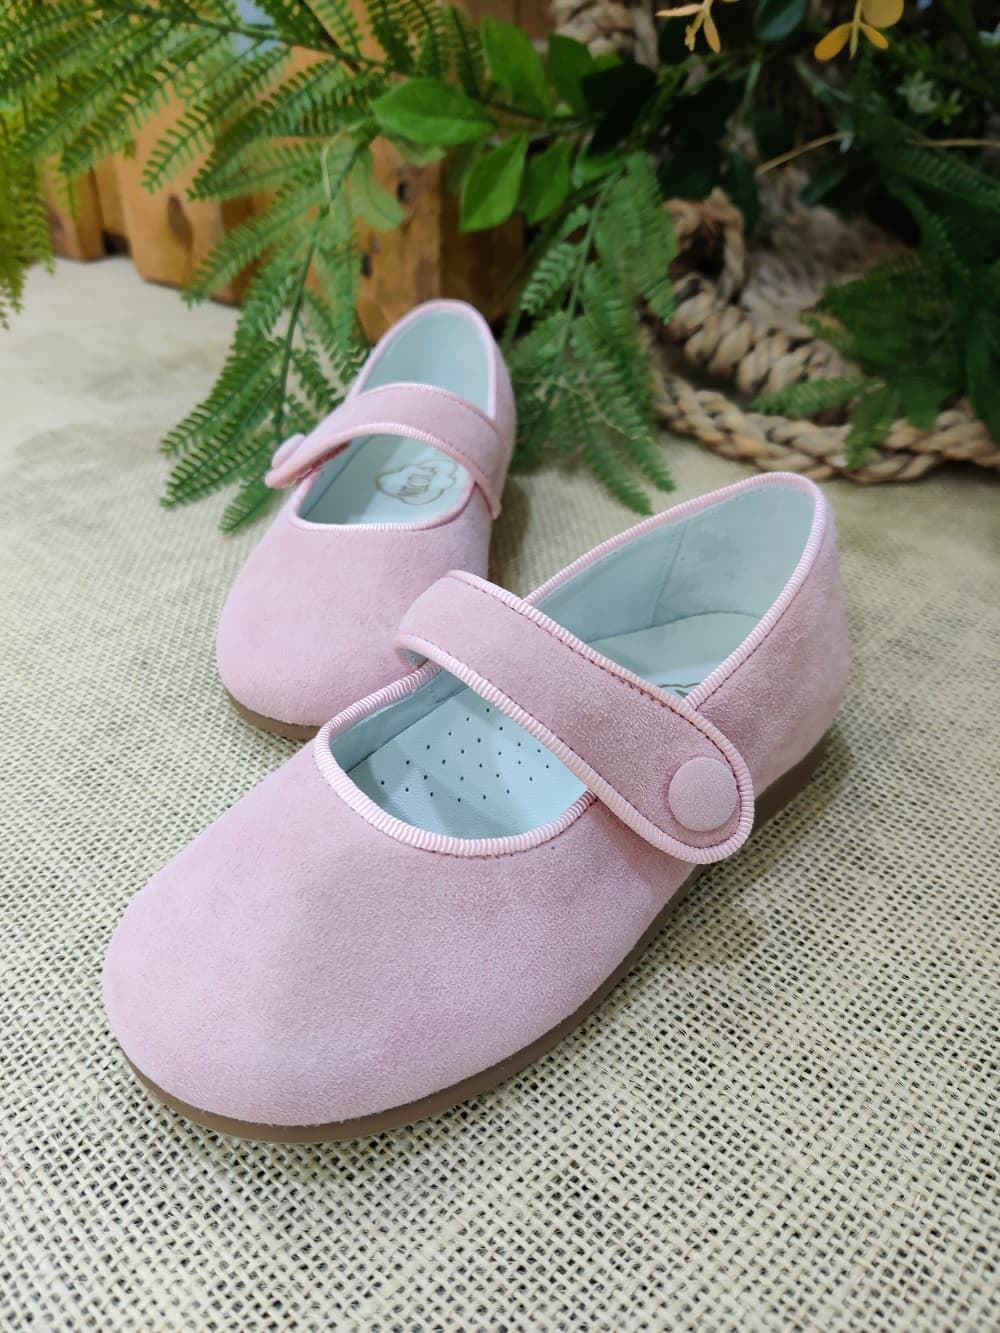 Pirufin (Piruflex) Mary Janes for baby girls in Pink suede - Image 5